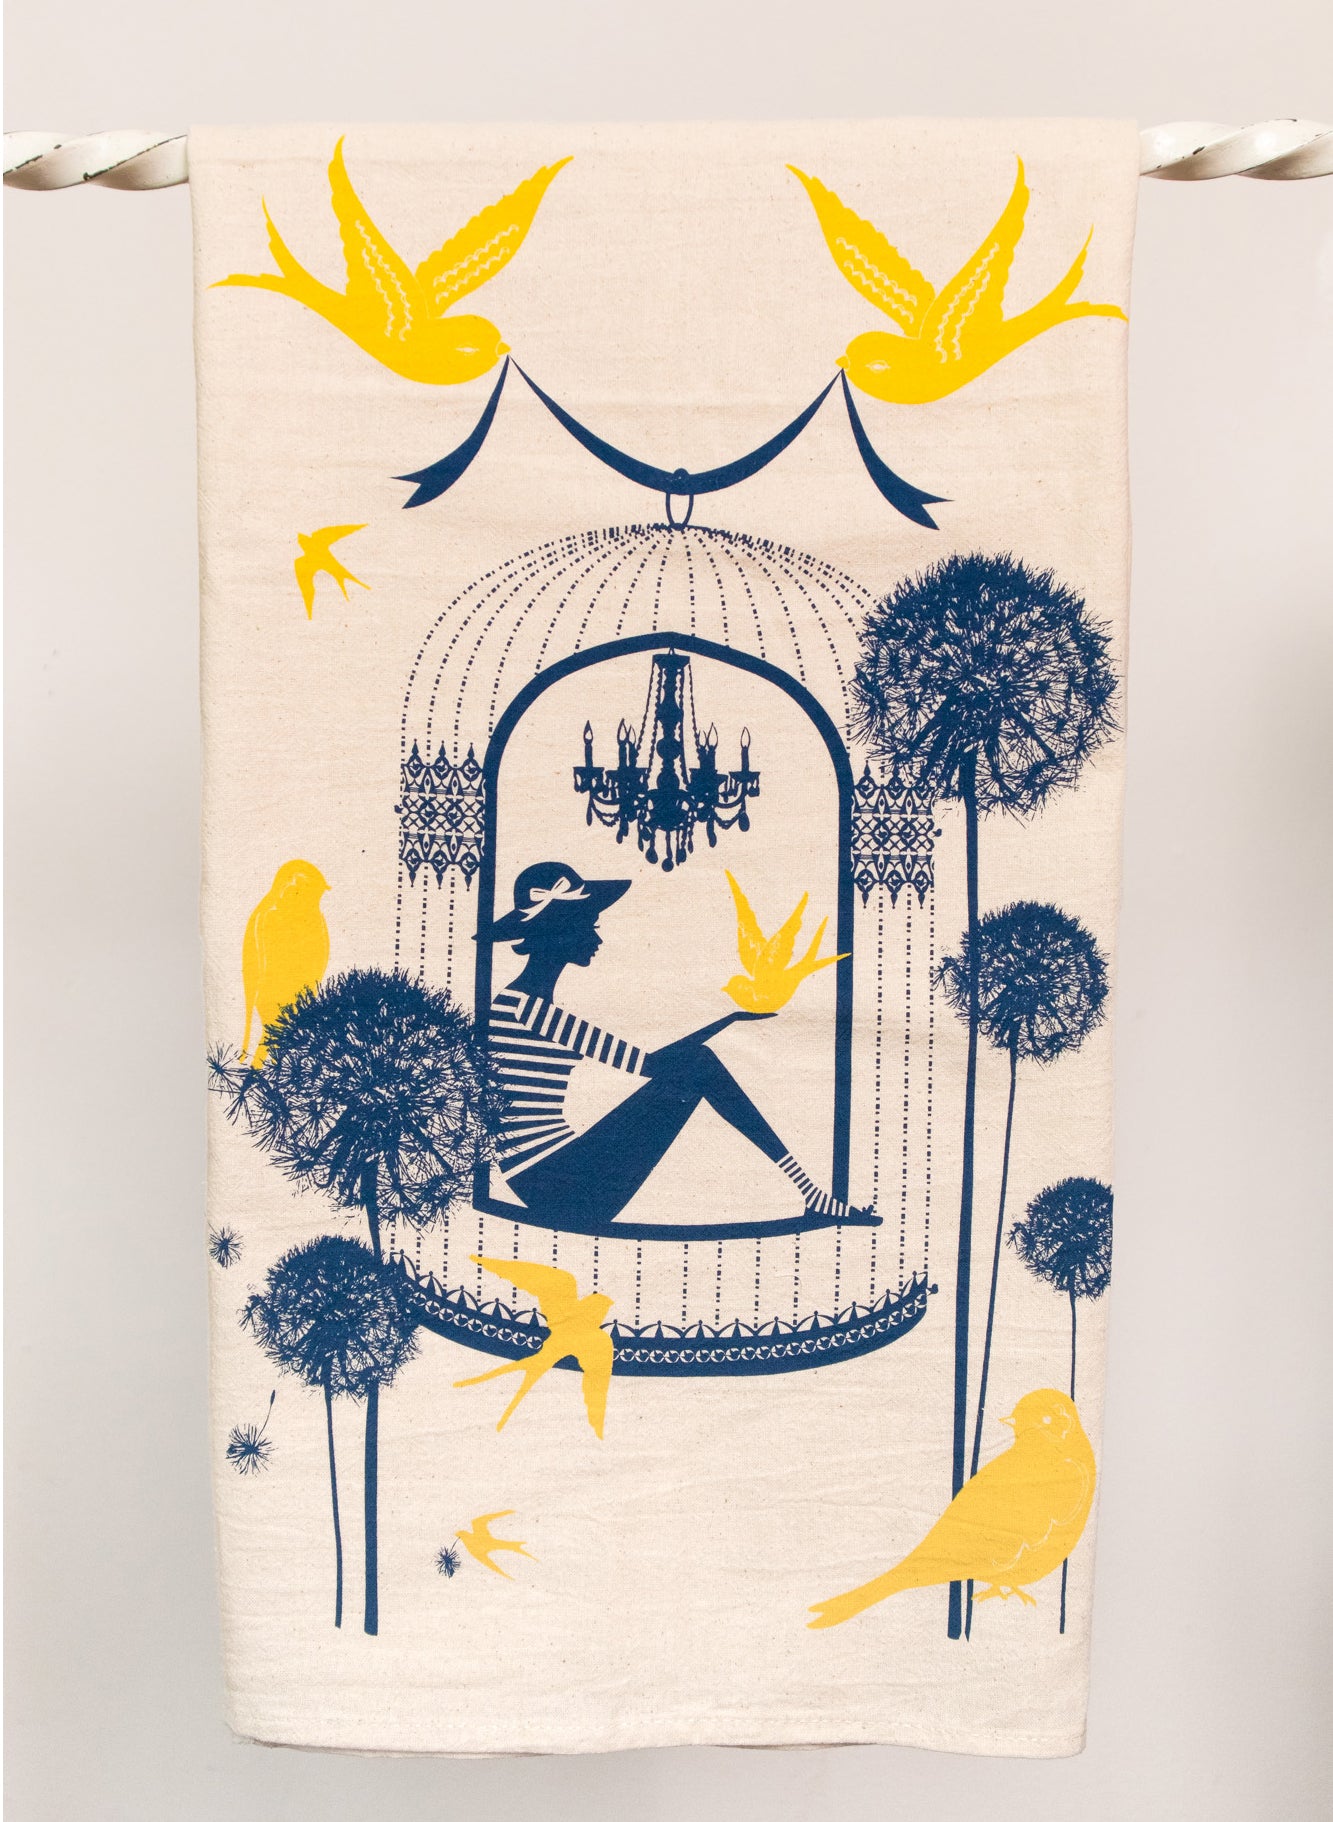 Cotton tea towel with yellow and navy print of a woman in a birdcage with birds and flowers